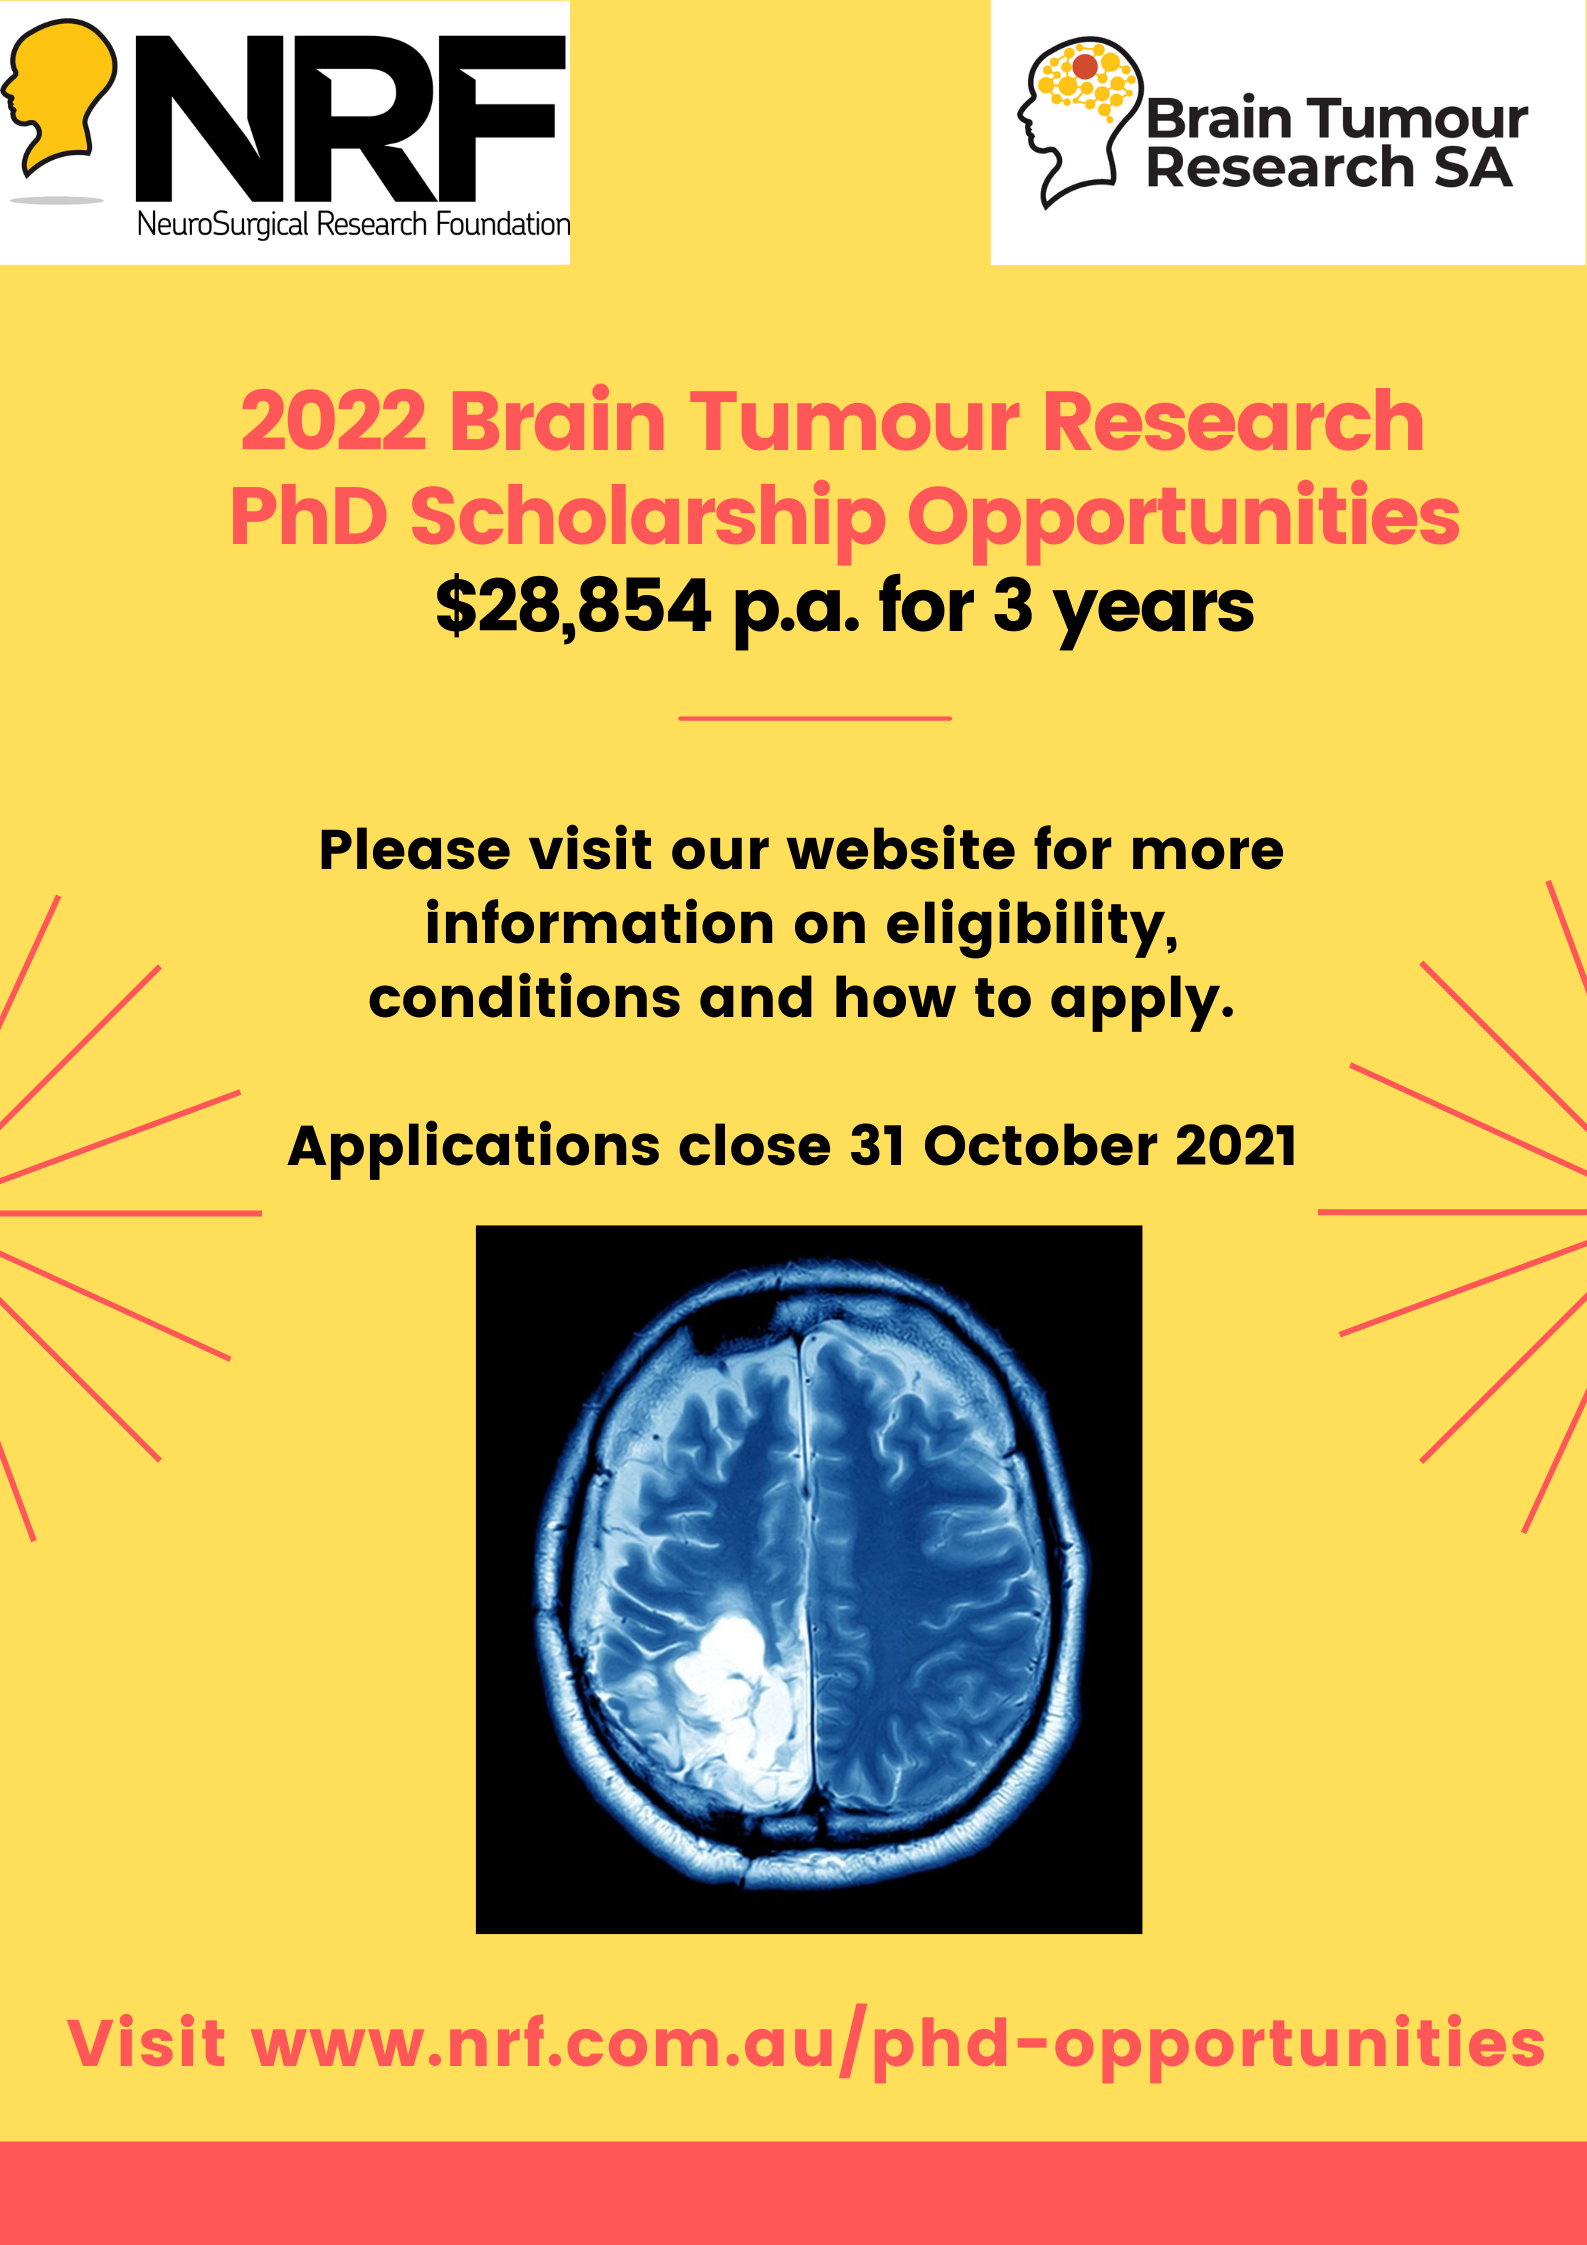 NeuroSurgical Research Foundation PhD Scholarships Available (1).png (775 KB)